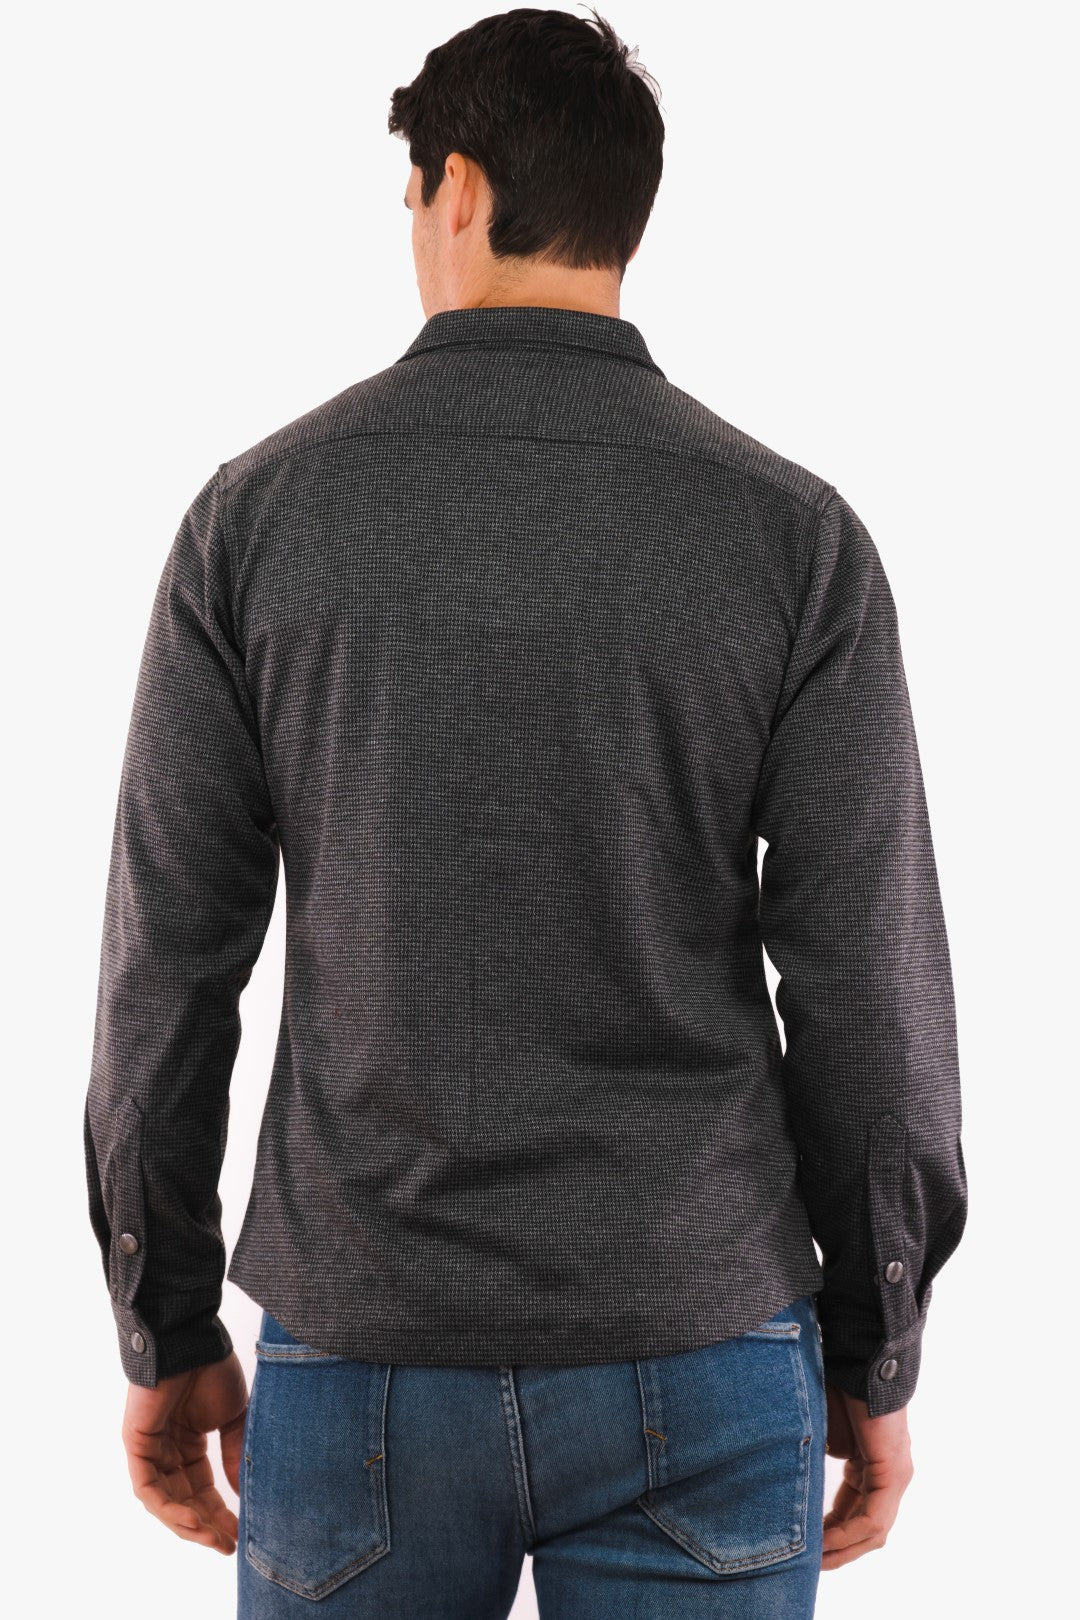 Hörst Overshirt in Charcoal